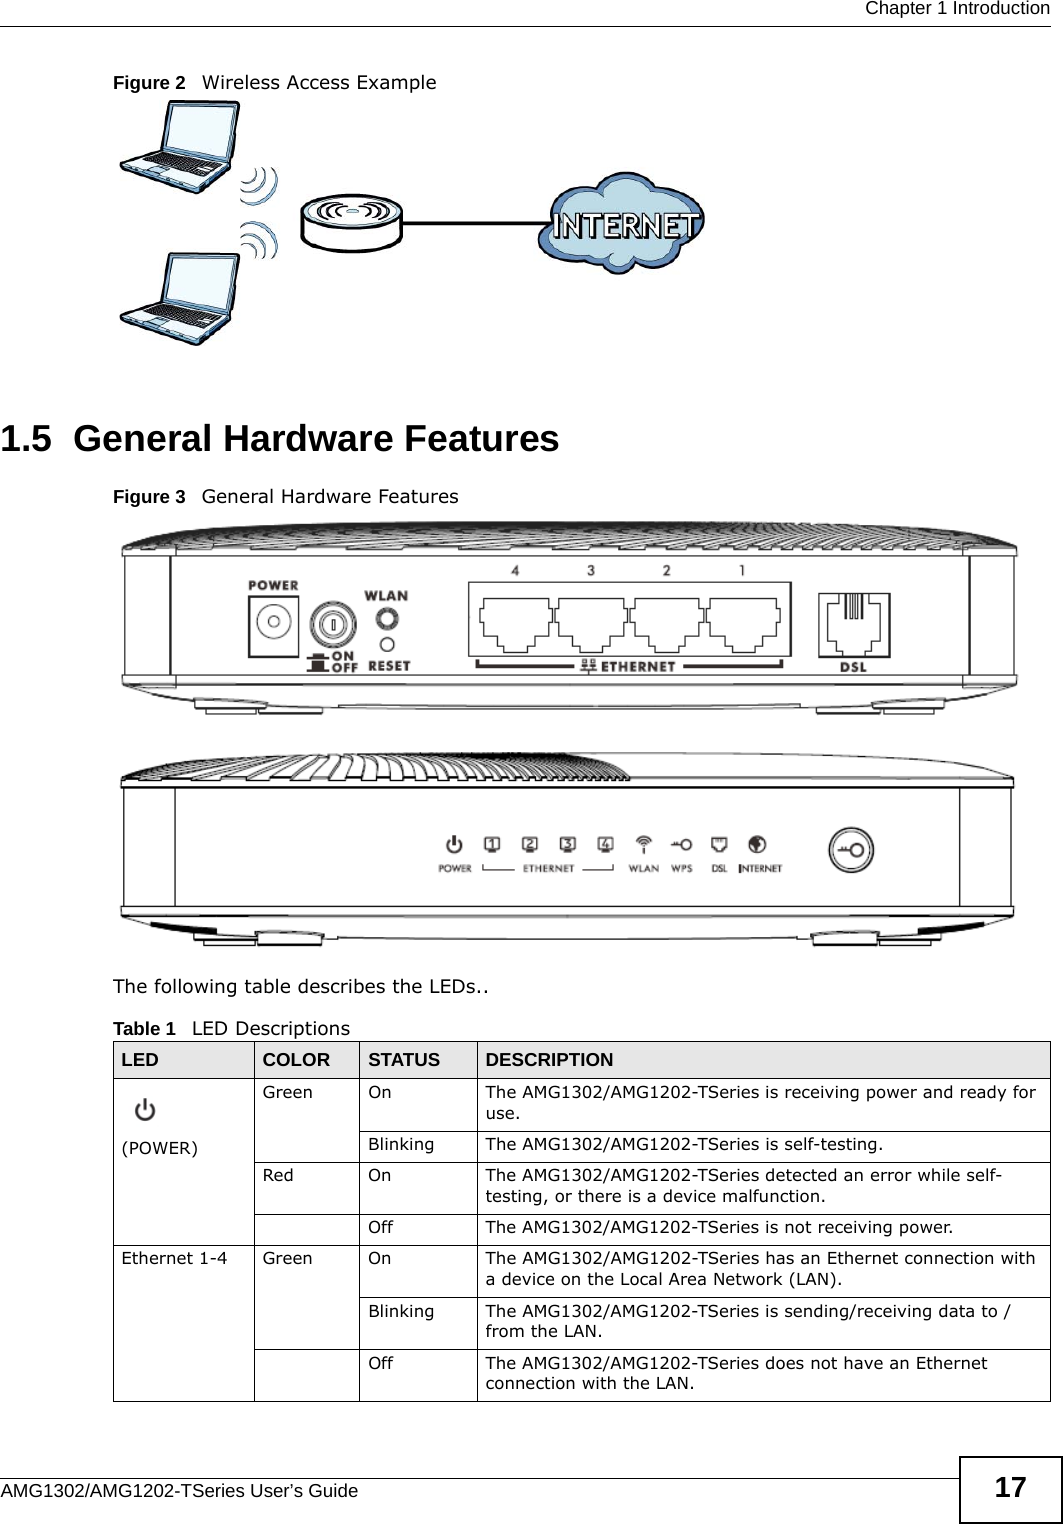  Chapter 1 IntroductionAMG1302/AMG1202-TSeries User’s Guide 17Figure 2   Wireless Access Example1.5  General Hardware FeaturesFigure 3   General Hardware Features The following table describes the LEDs..Table 1   LED DescriptionsLED COLOR STATUS DESCRIPTION(POWER)Green On The AMG1302/AMG1202-TSeries is receiving power and ready for use.Blinking The AMG1302/AMG1202-TSeries is self-testing.Red On The AMG1302/AMG1202-TSeries detected an error while self-testing, or there is a device malfunction.Off The AMG1302/AMG1202-TSeries is not receiving power.Ethernet 1-4 Green On The AMG1302/AMG1202-TSeries has an Ethernet connection with a device on the Local Area Network (LAN).Blinking The AMG1302/AMG1202-TSeries is sending/receiving data to /from the LAN.Off The AMG1302/AMG1202-TSeries does not have an Ethernet connection with the LAN.